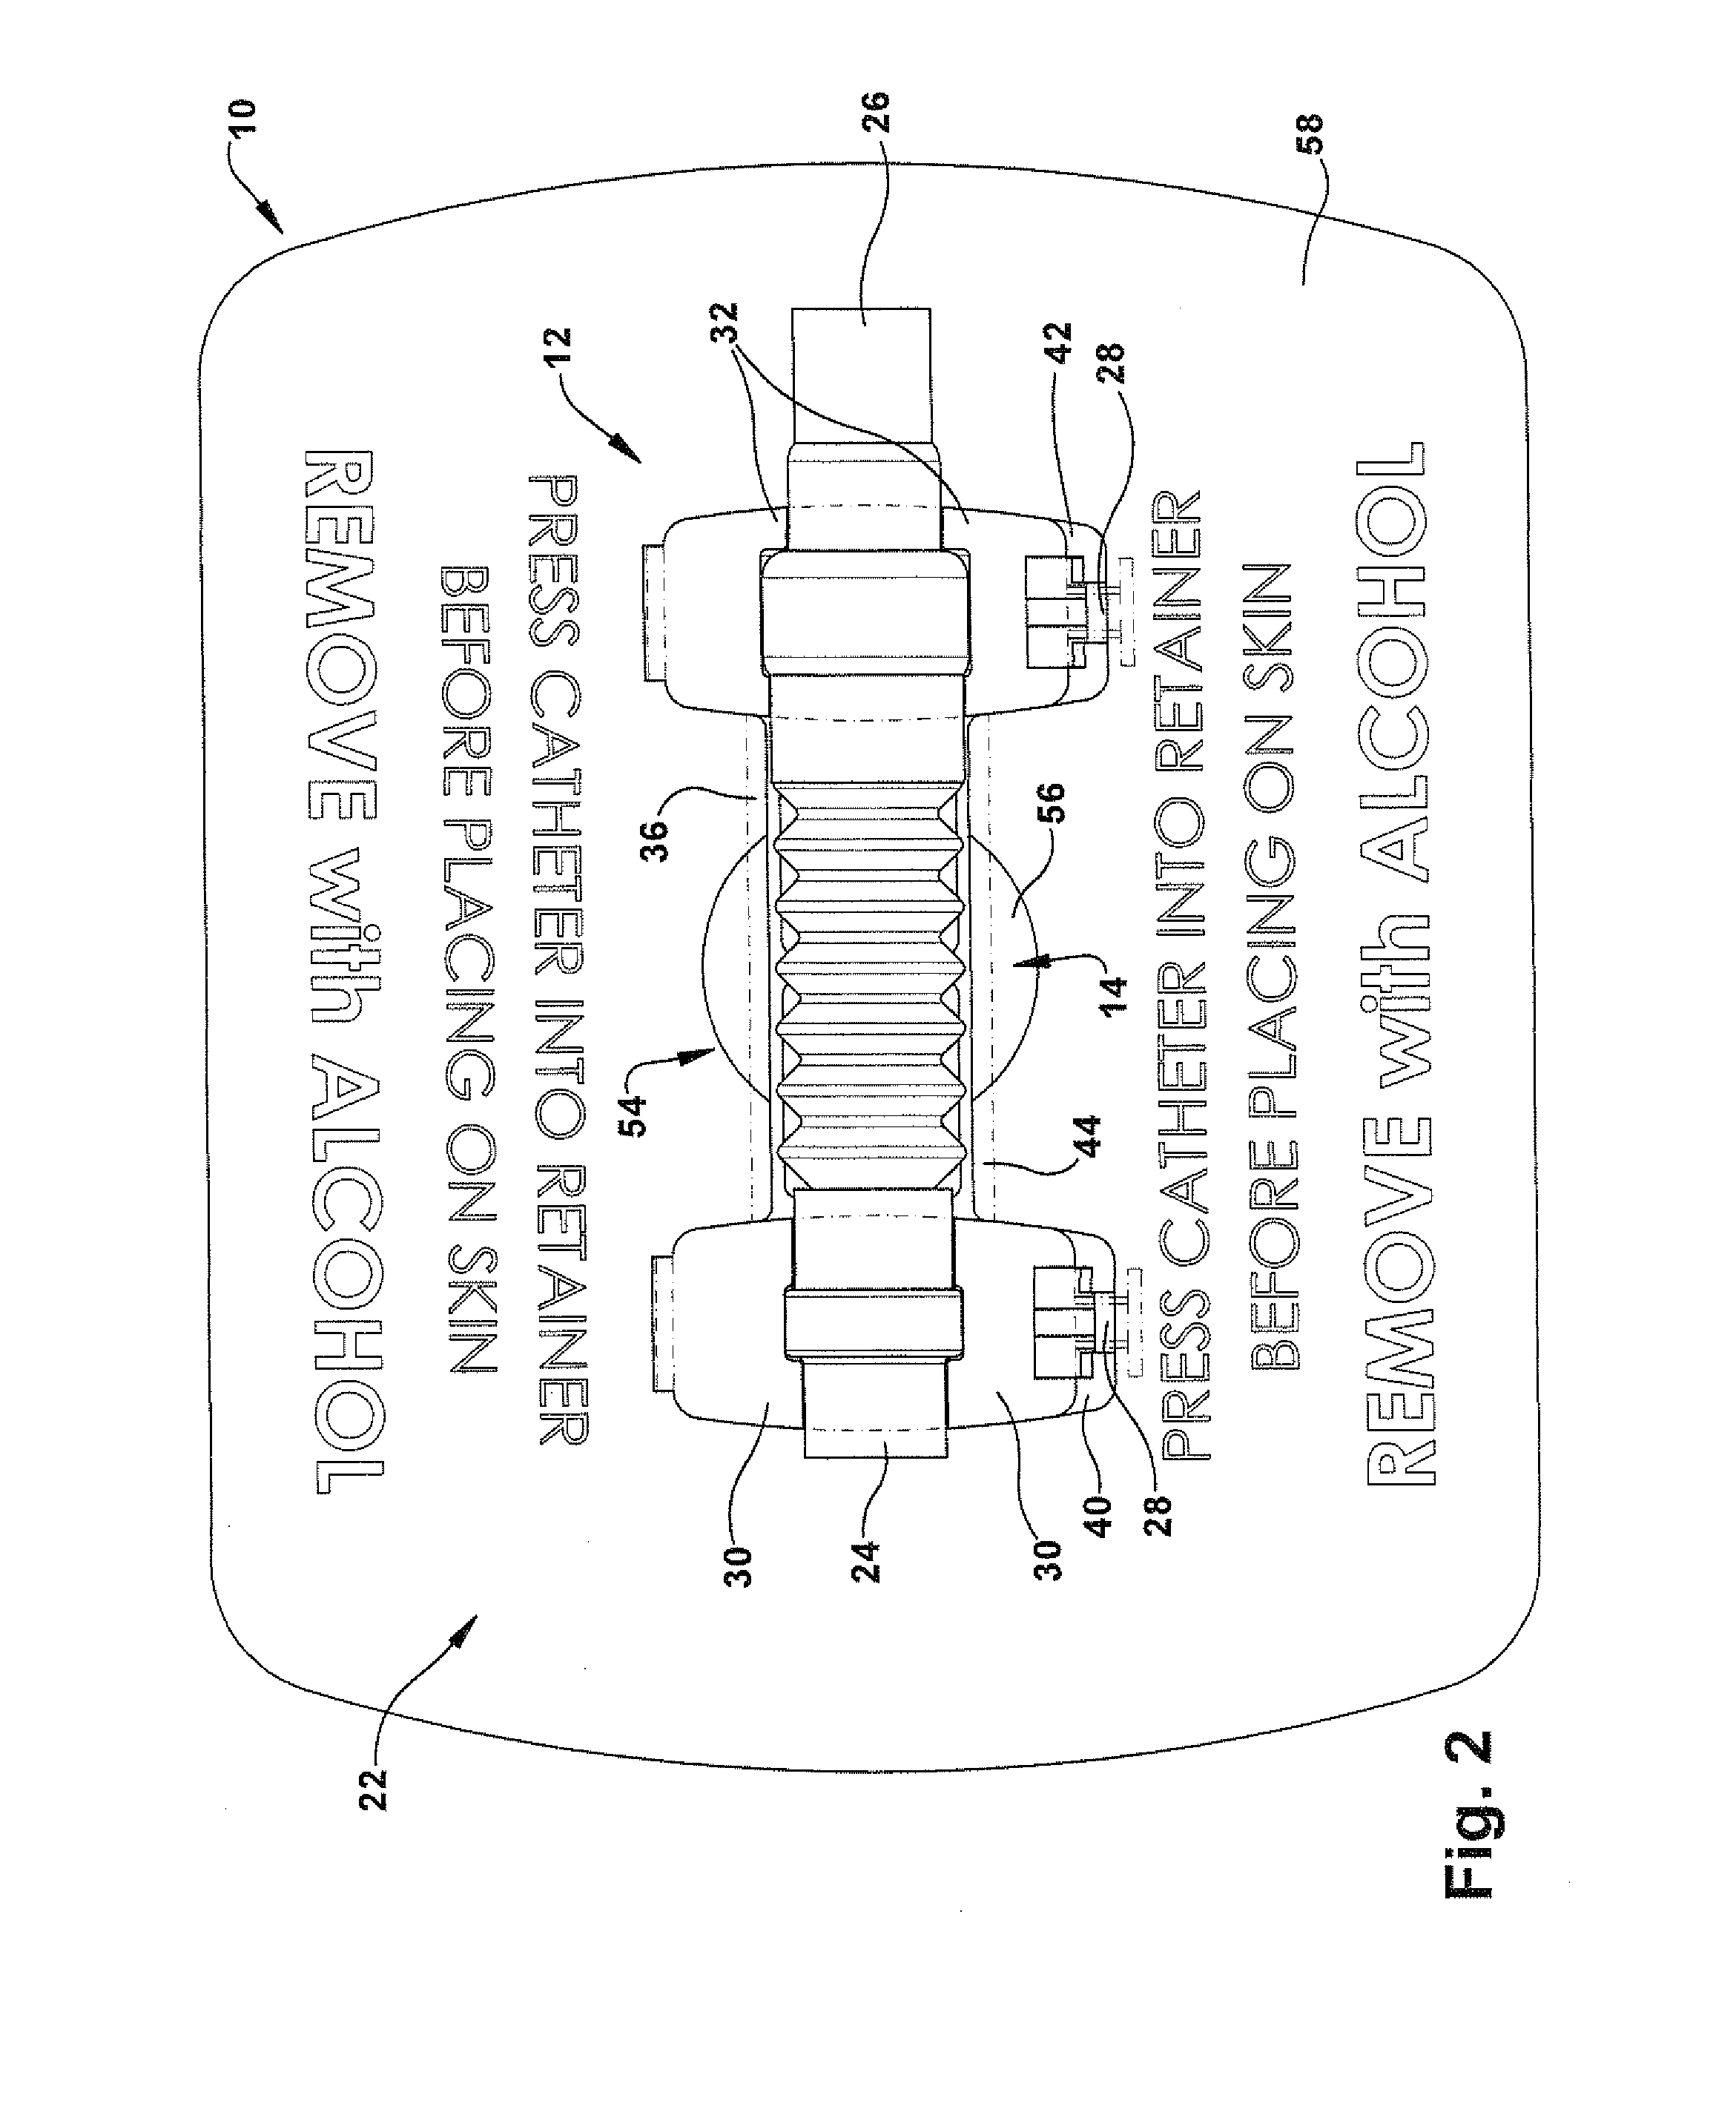 Urinary catheter stabilizer and method of use